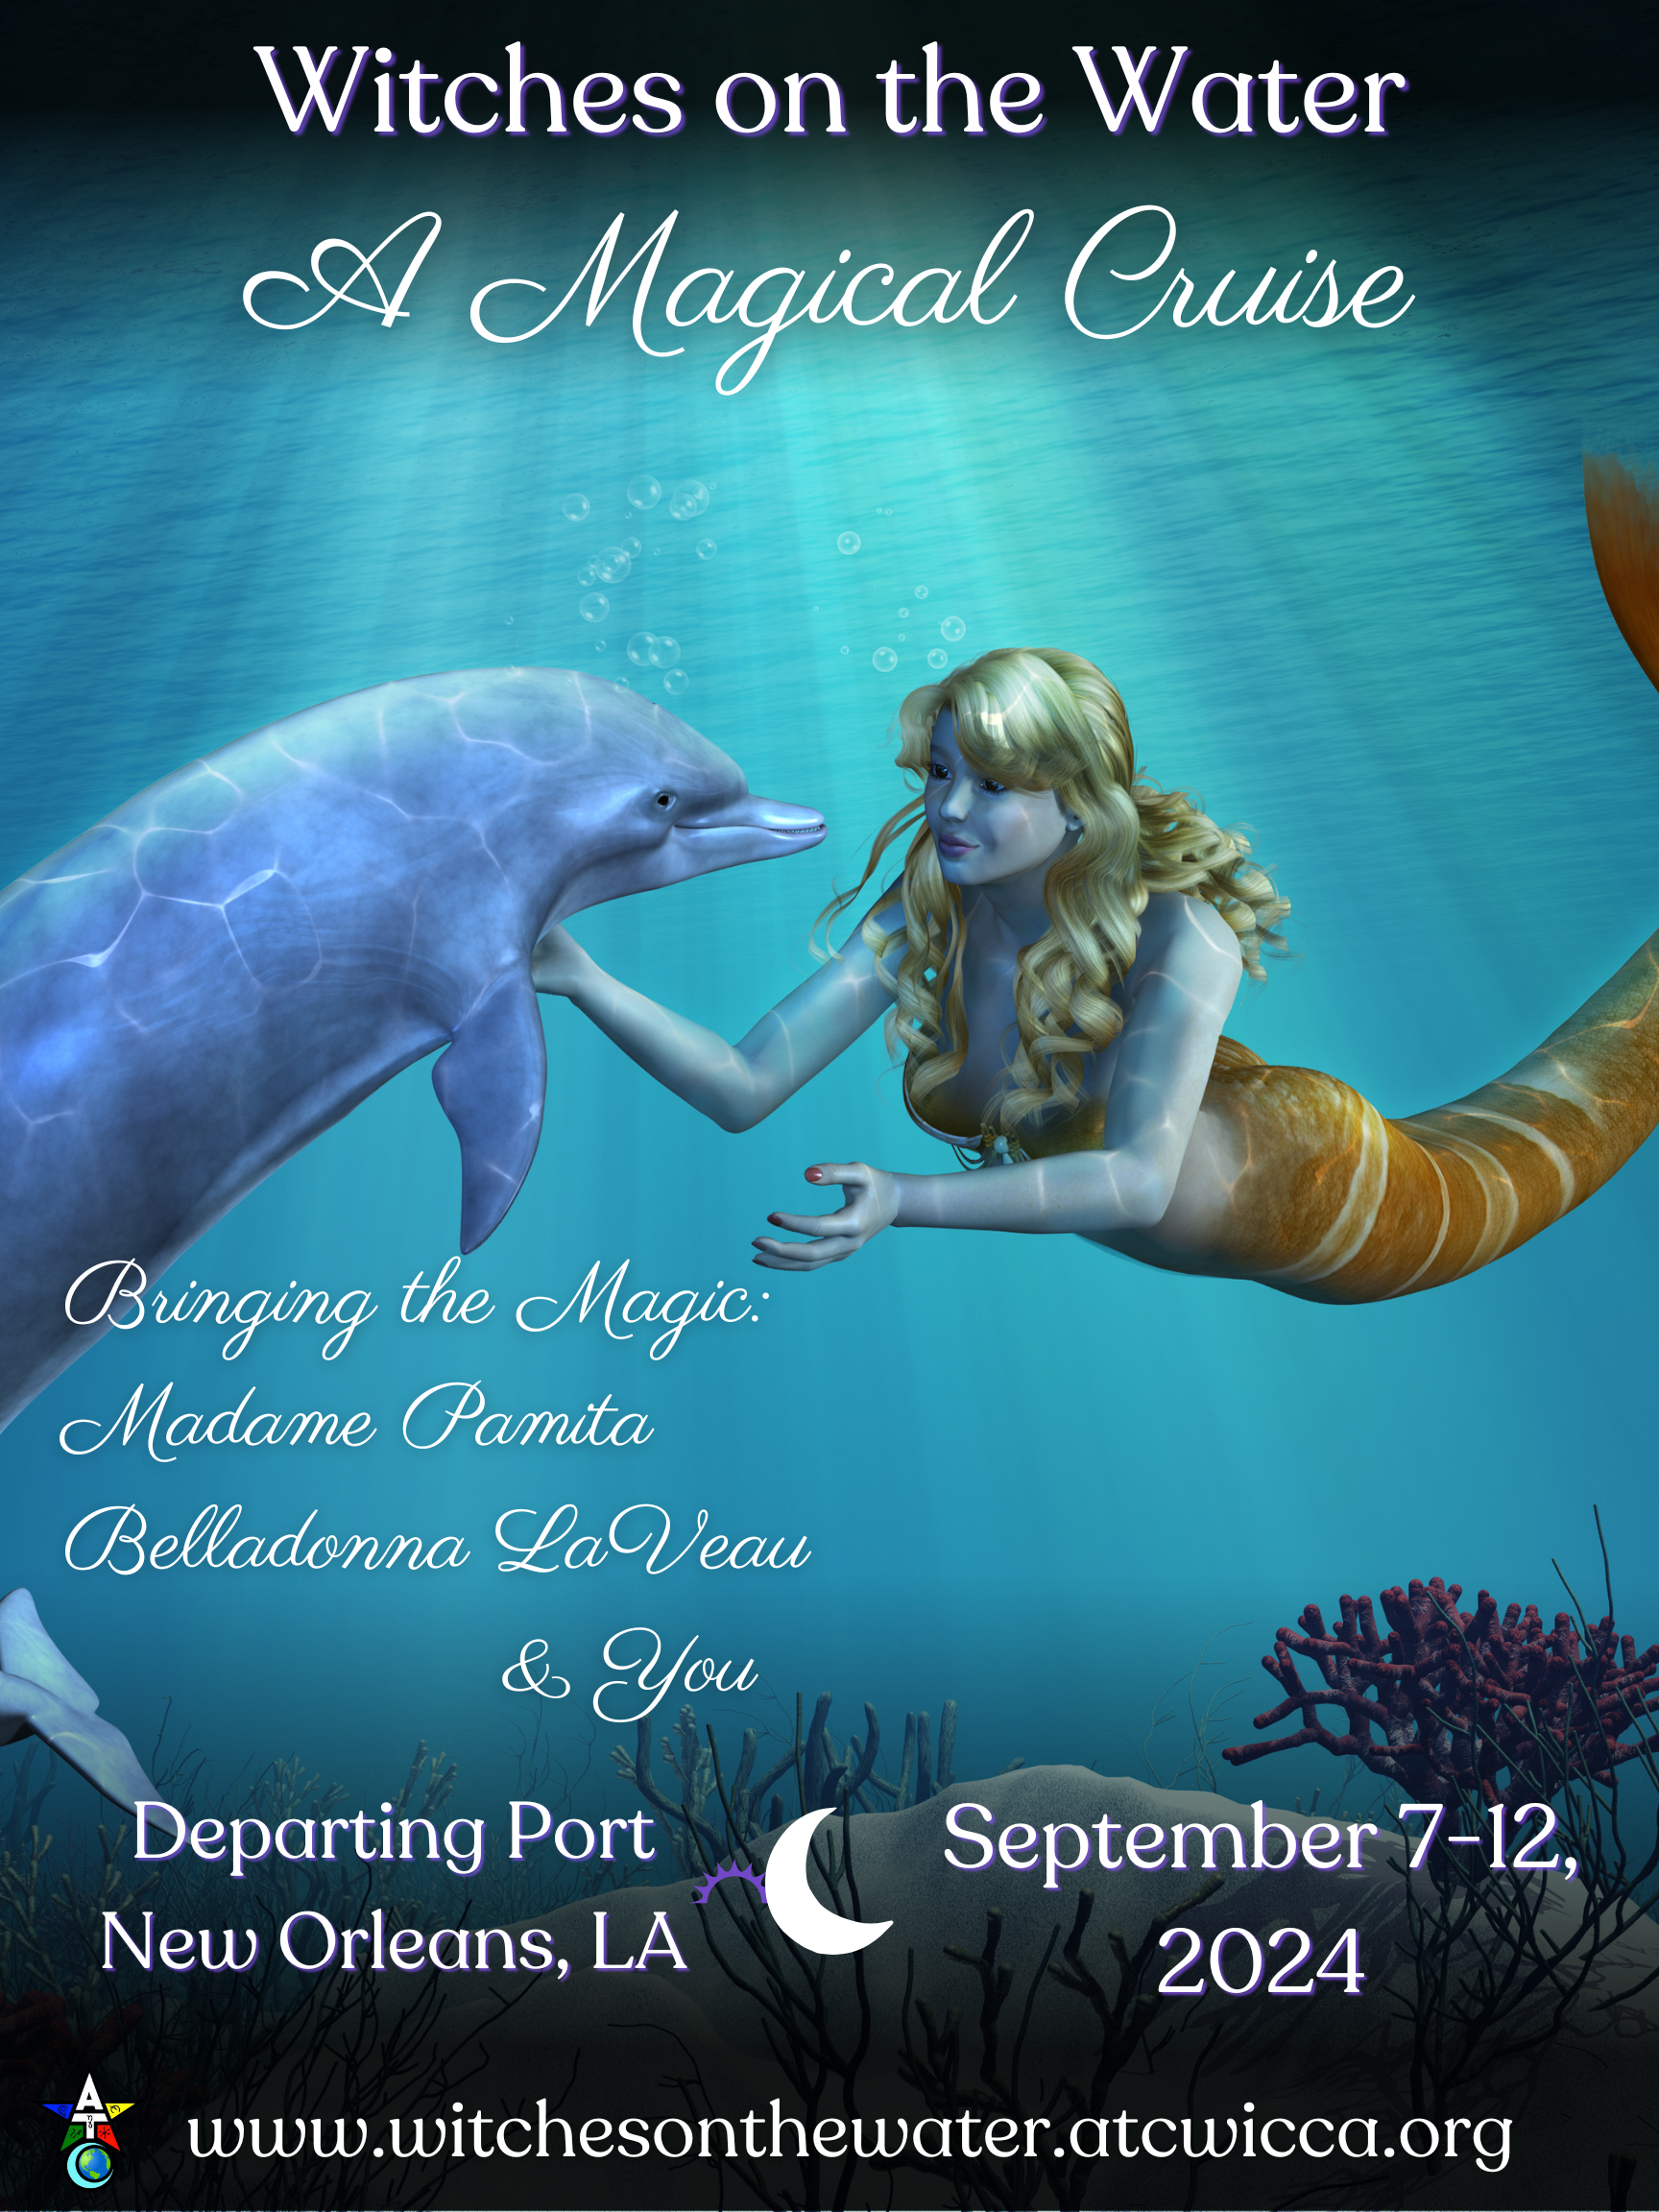 A poster for witches on the water a magical cruise, with a mermaid and a dolphin.